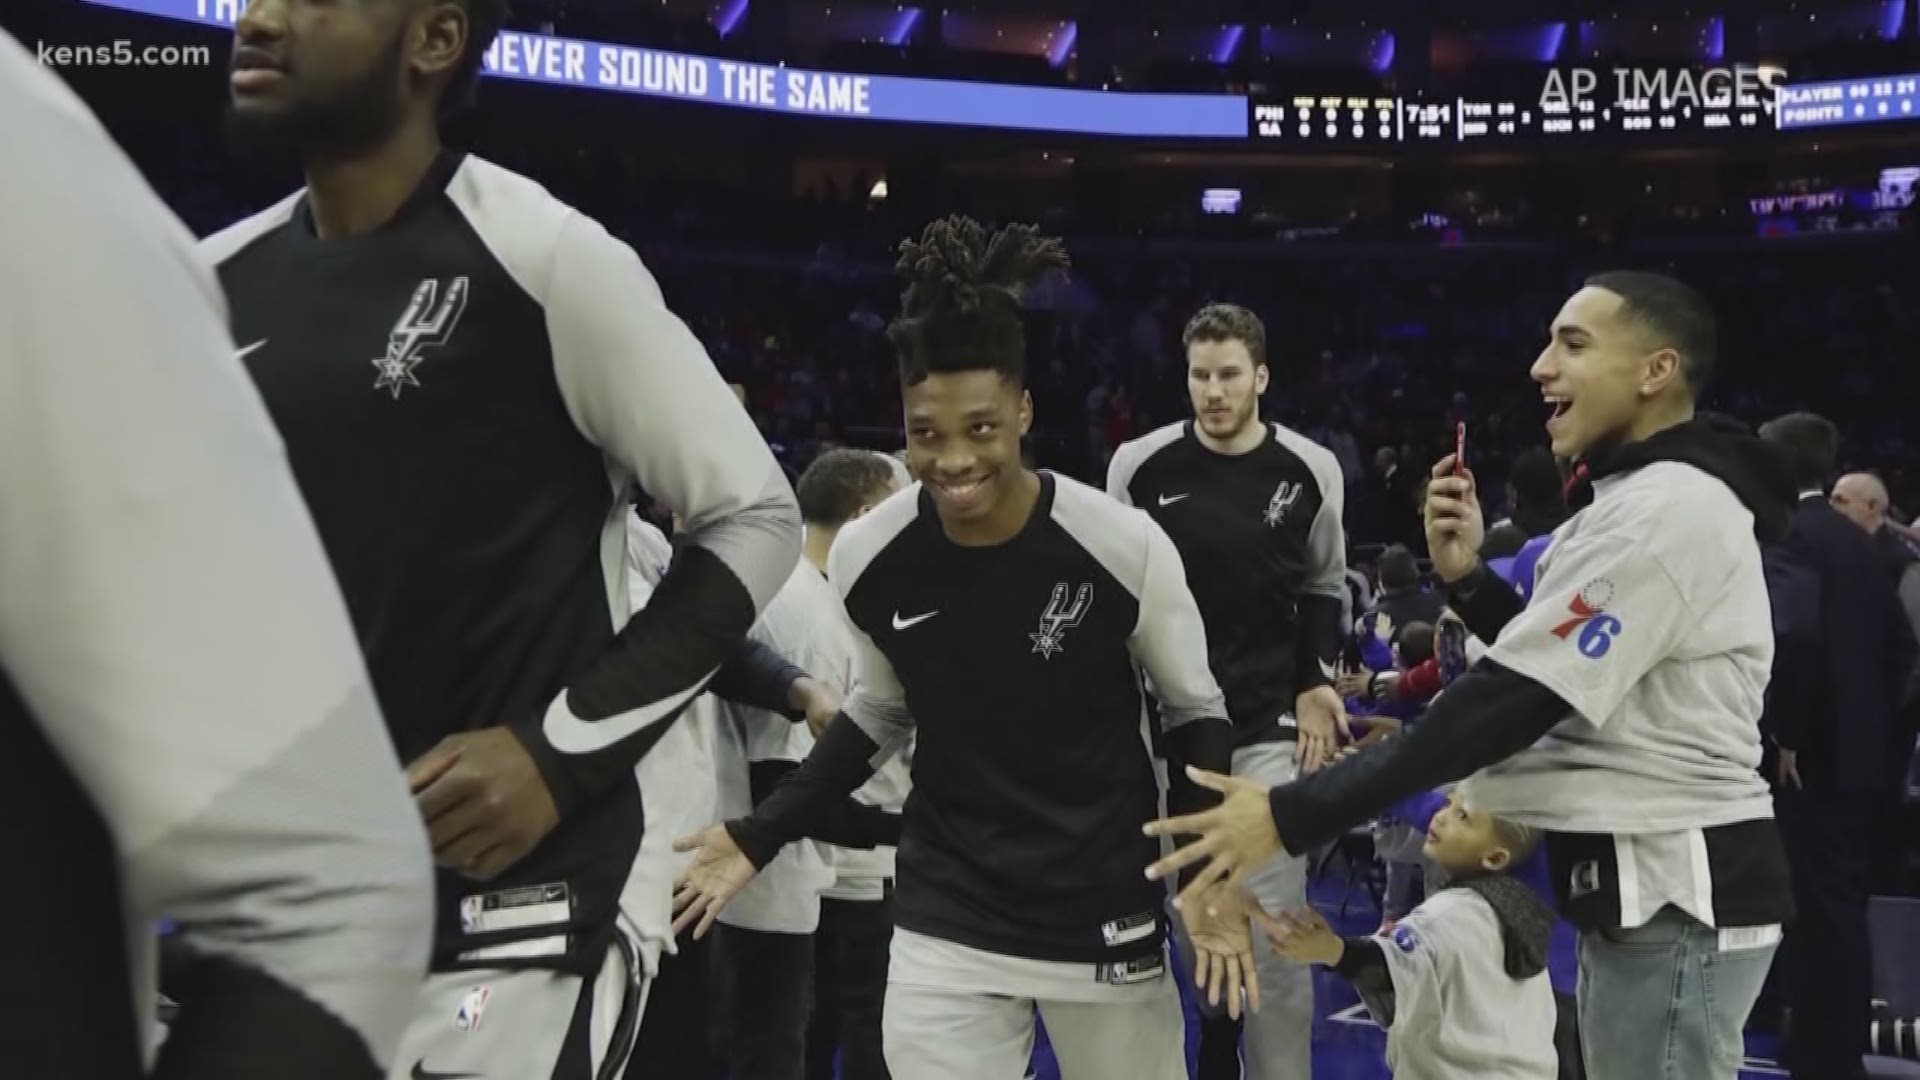 Spurs fans on social media are debating whether the Spurs should give Lonnie Walker IV more minutes and leave Marco Belinelli on the bench.